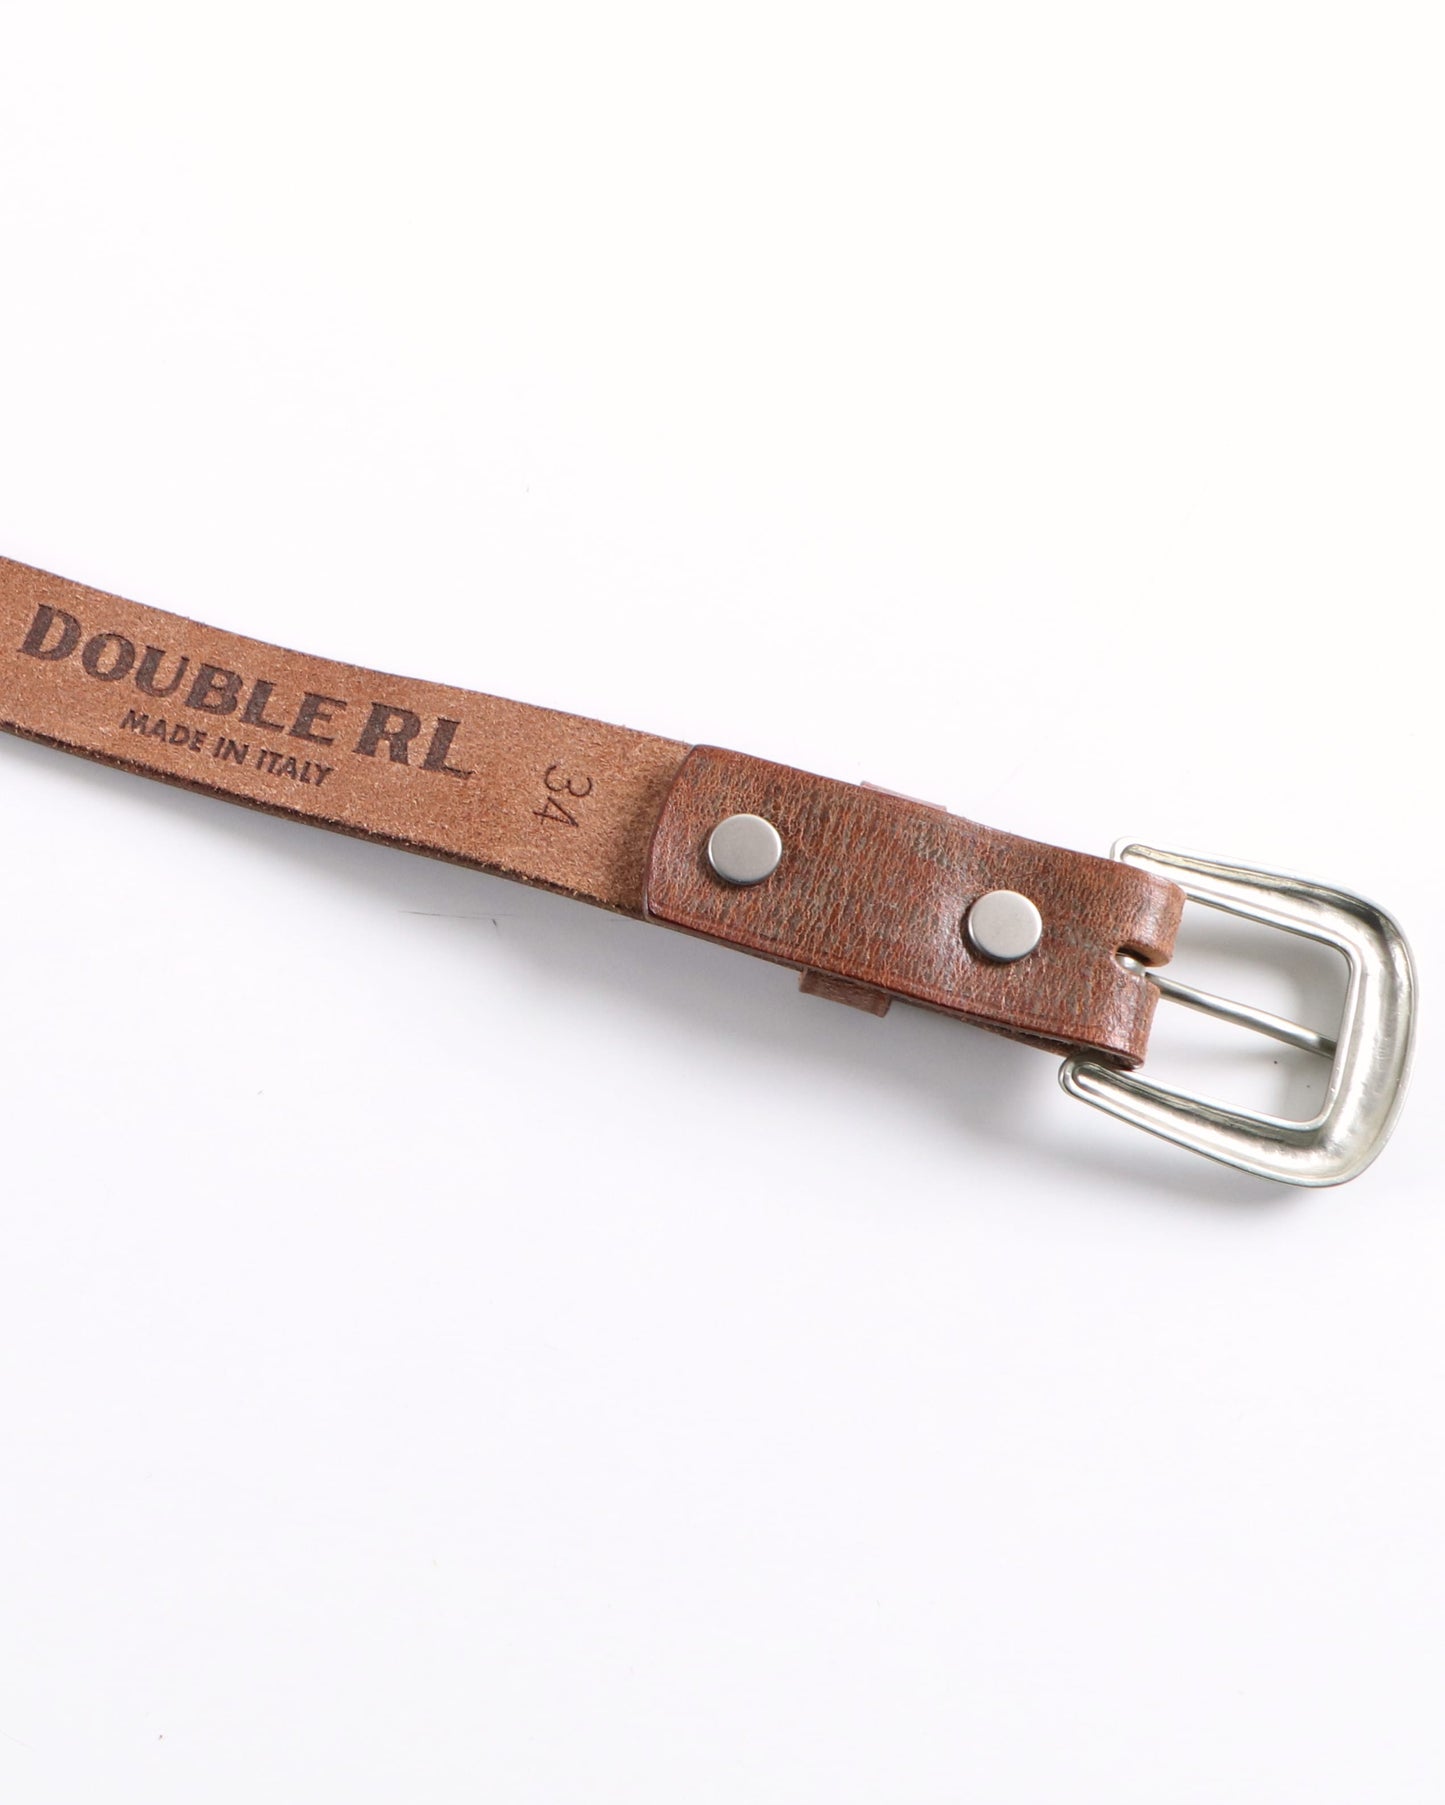 MILLER BELT-CASUAL-TUMBLED LEATHER